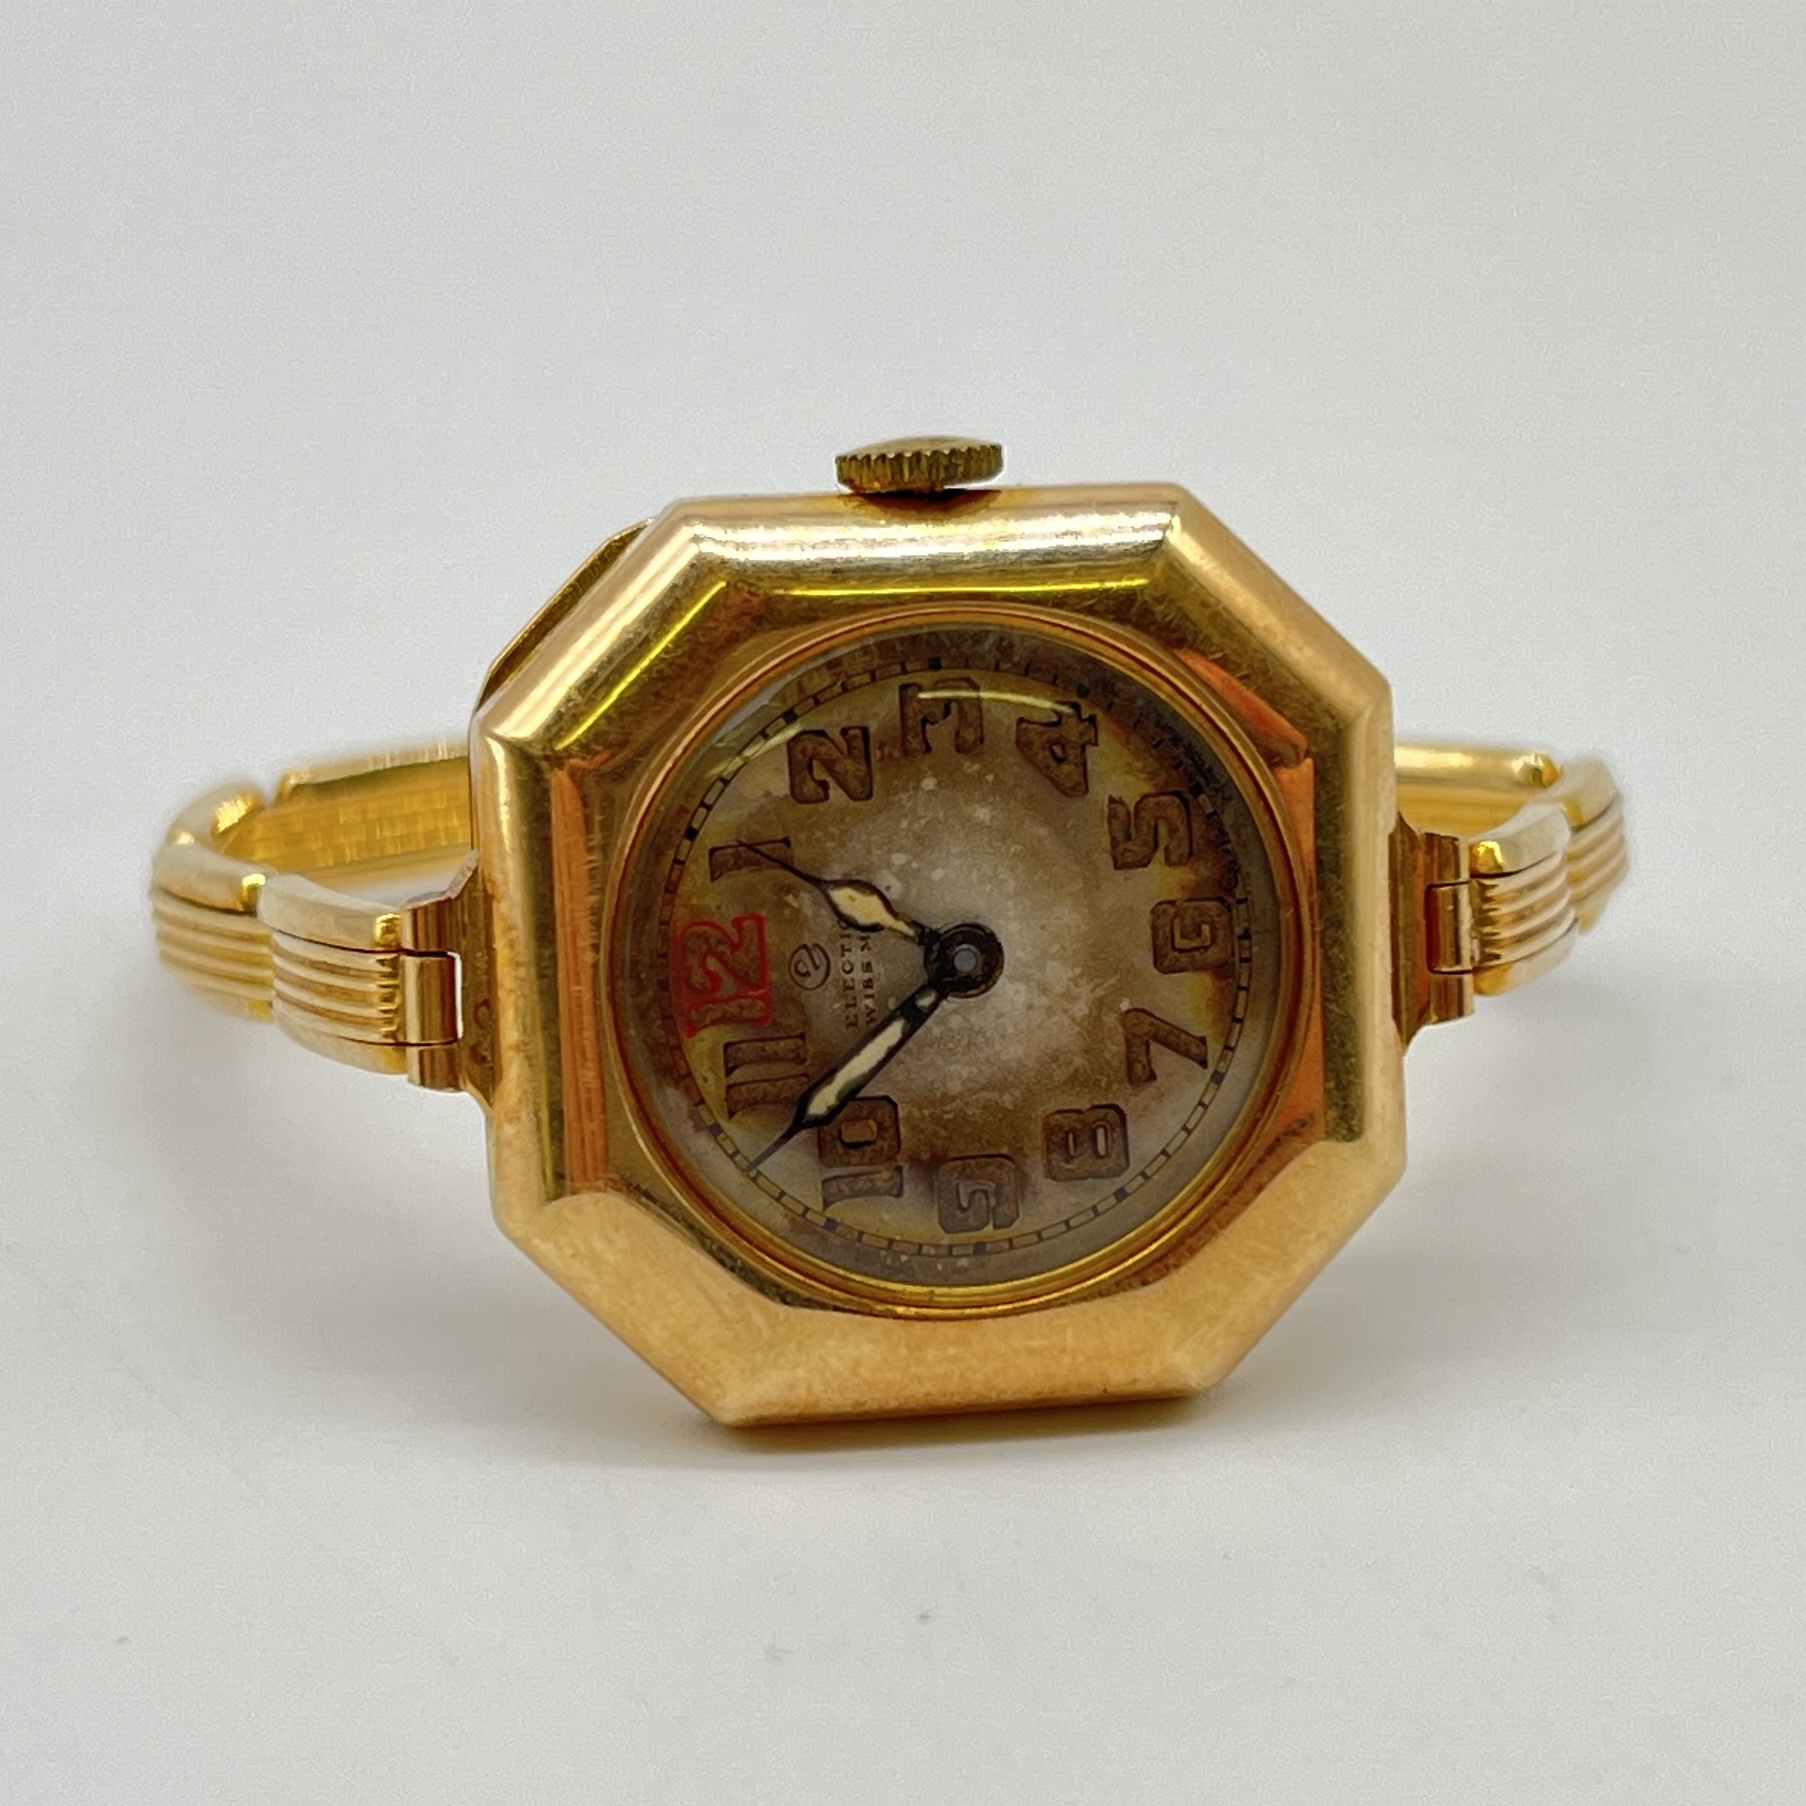 A 14ct yellow gold vintage watch